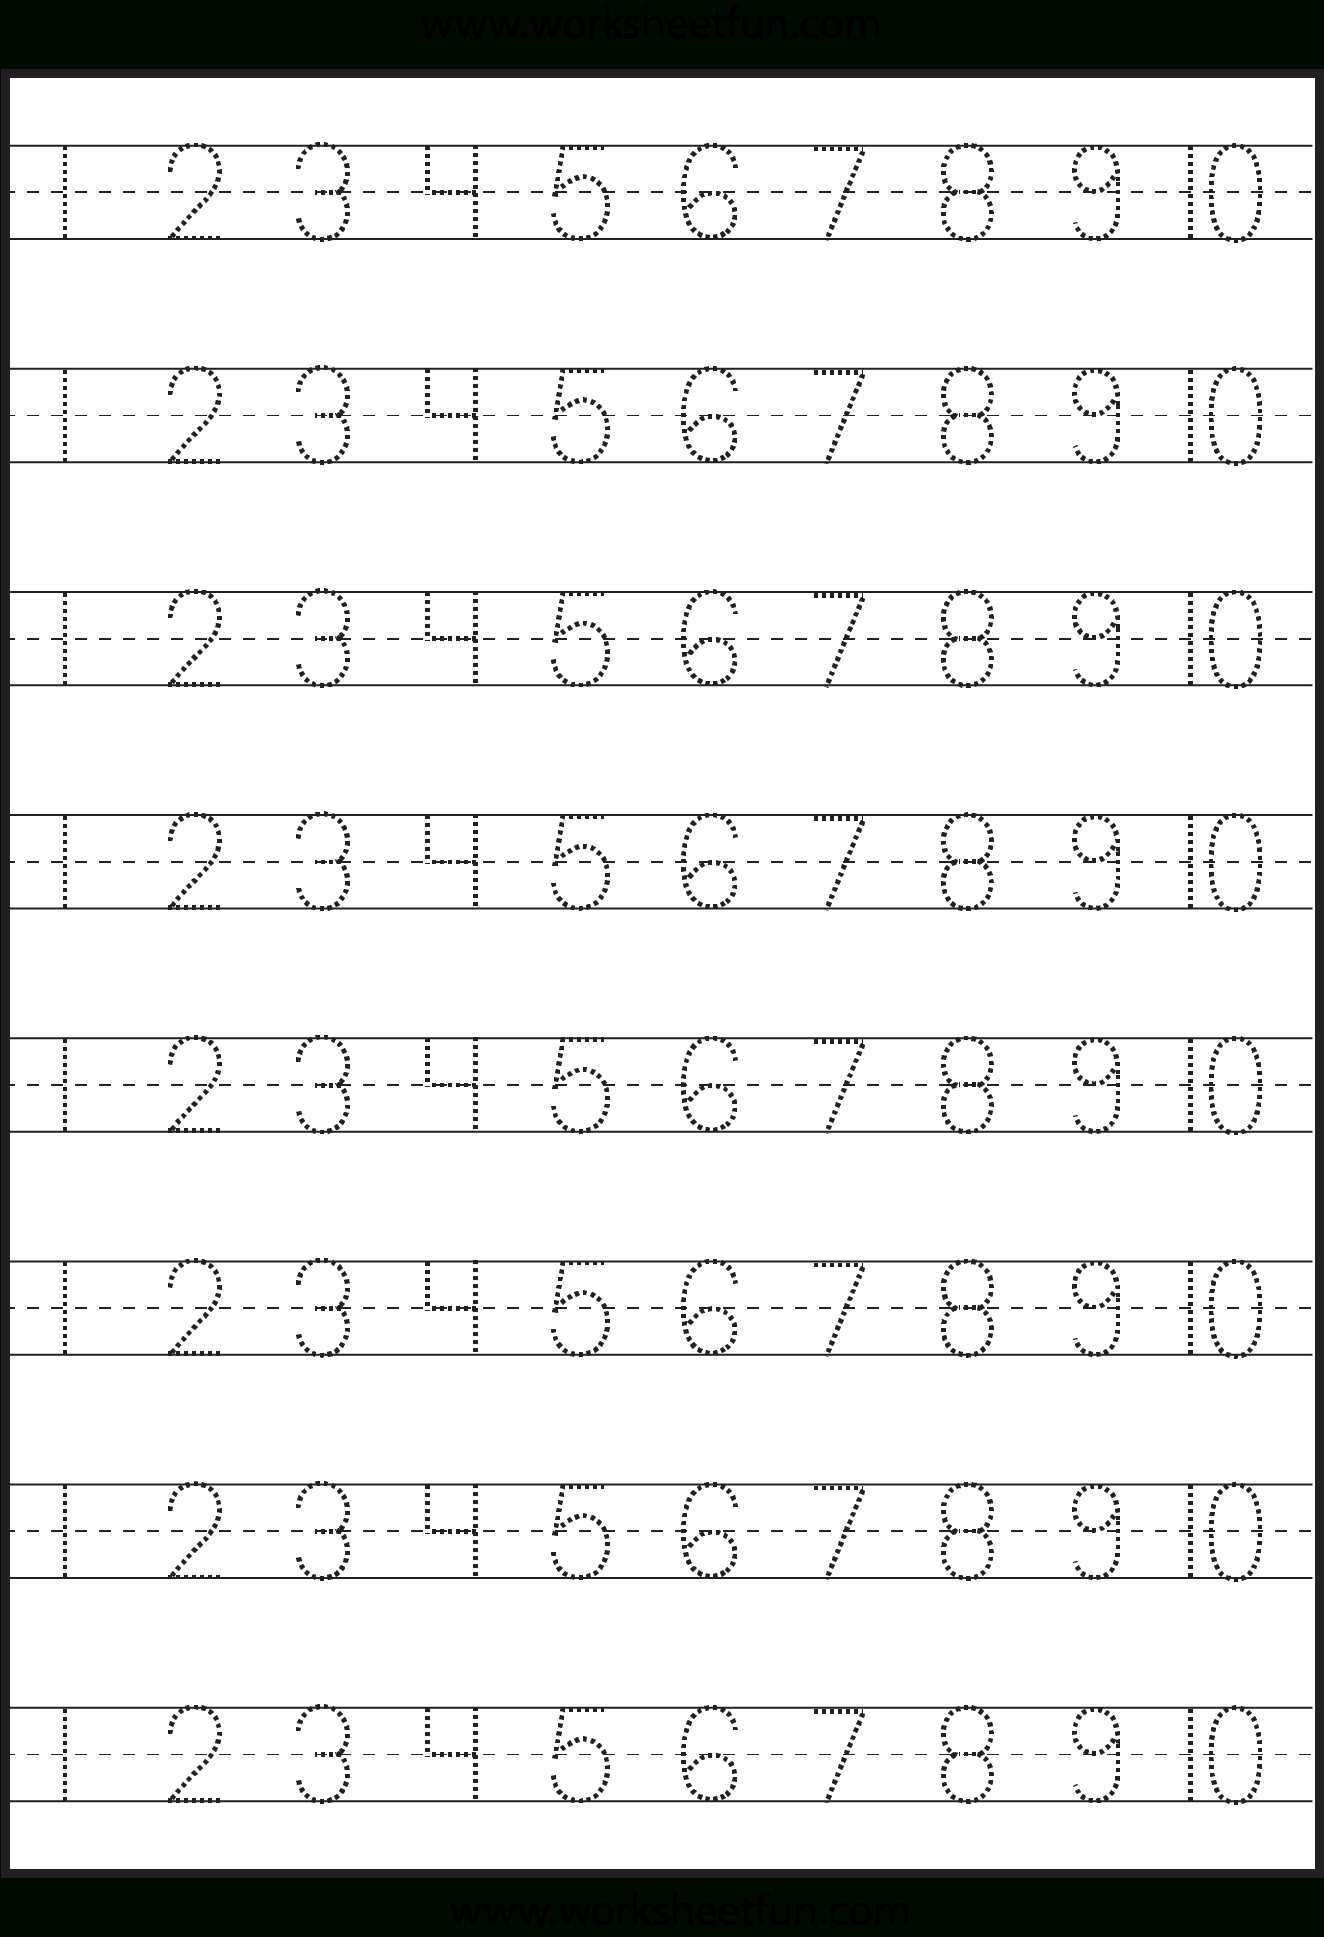 tracing-letters-and-numbers-free-worksheets-tracinglettersworksheetscom